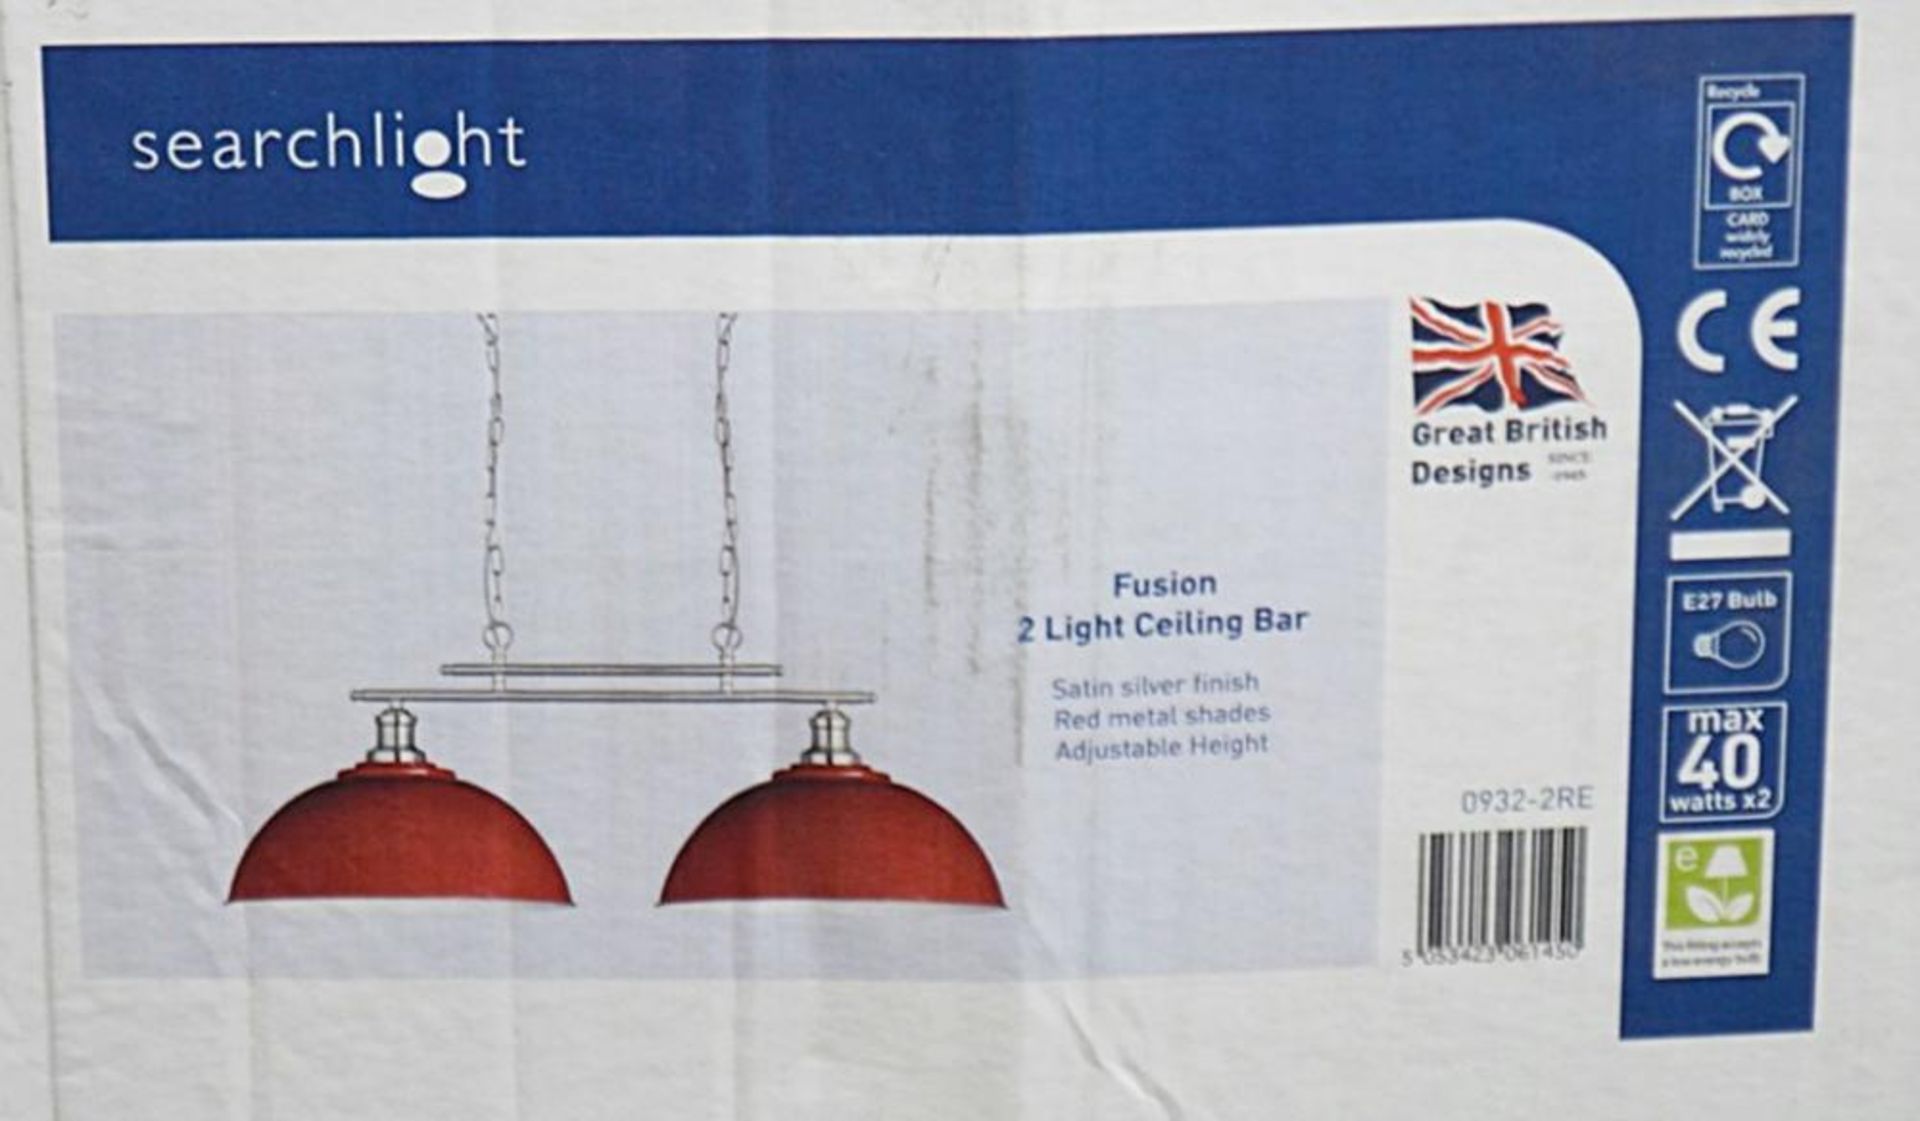 1 x Fusion Satin Silver 2-Light Ceiling Bar Light With Red Shades - New Boxed Stock - CL323 - Ref: 0 - Image 2 of 3